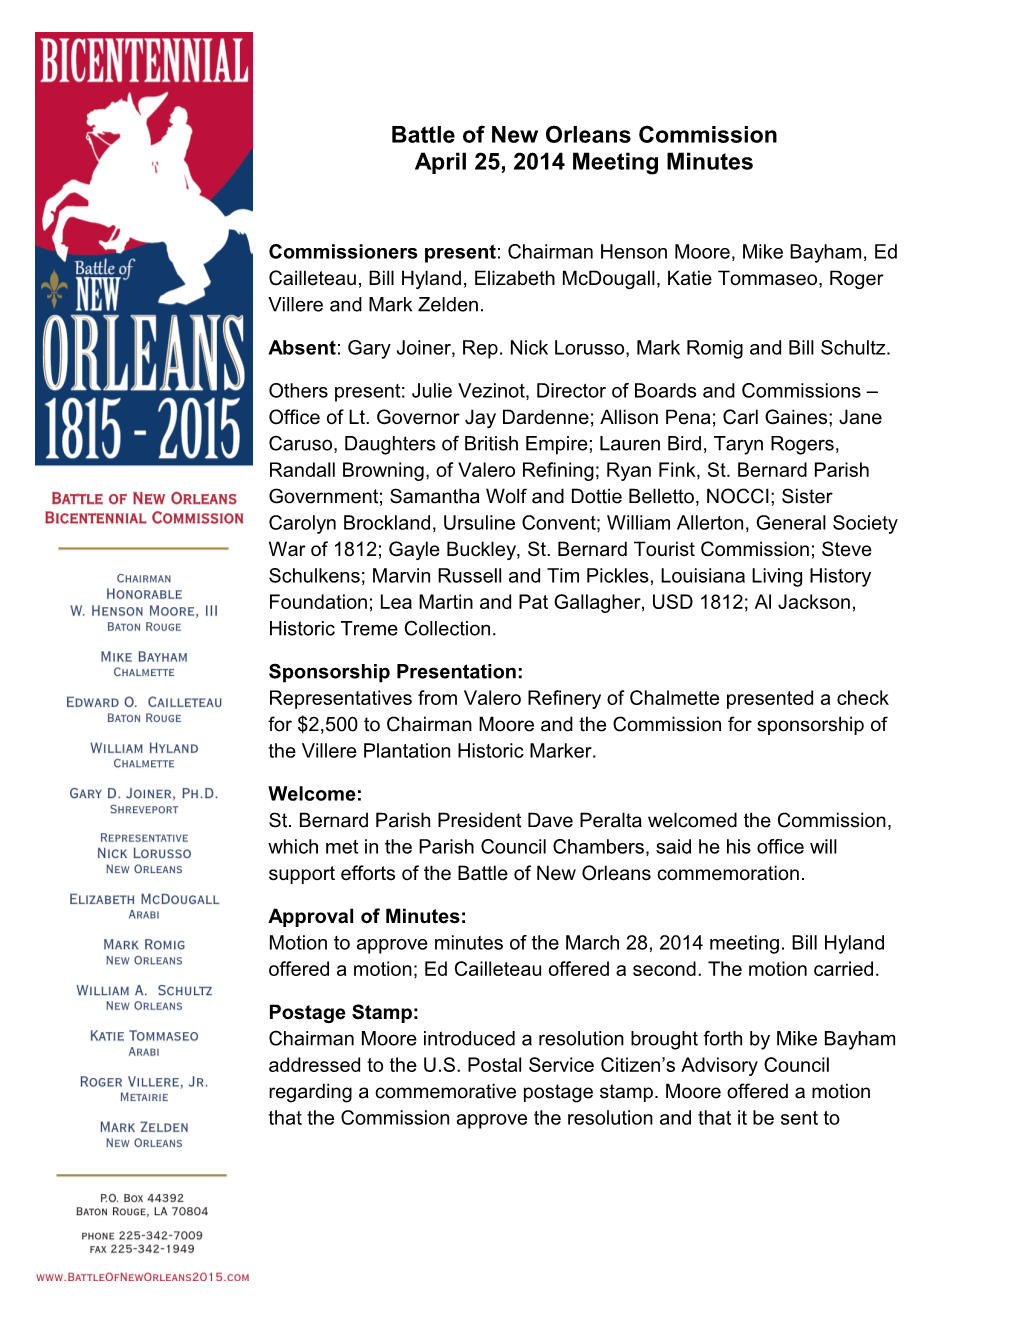 Battle of New Orleans Commission April 25, 2014 Meeting Minutes